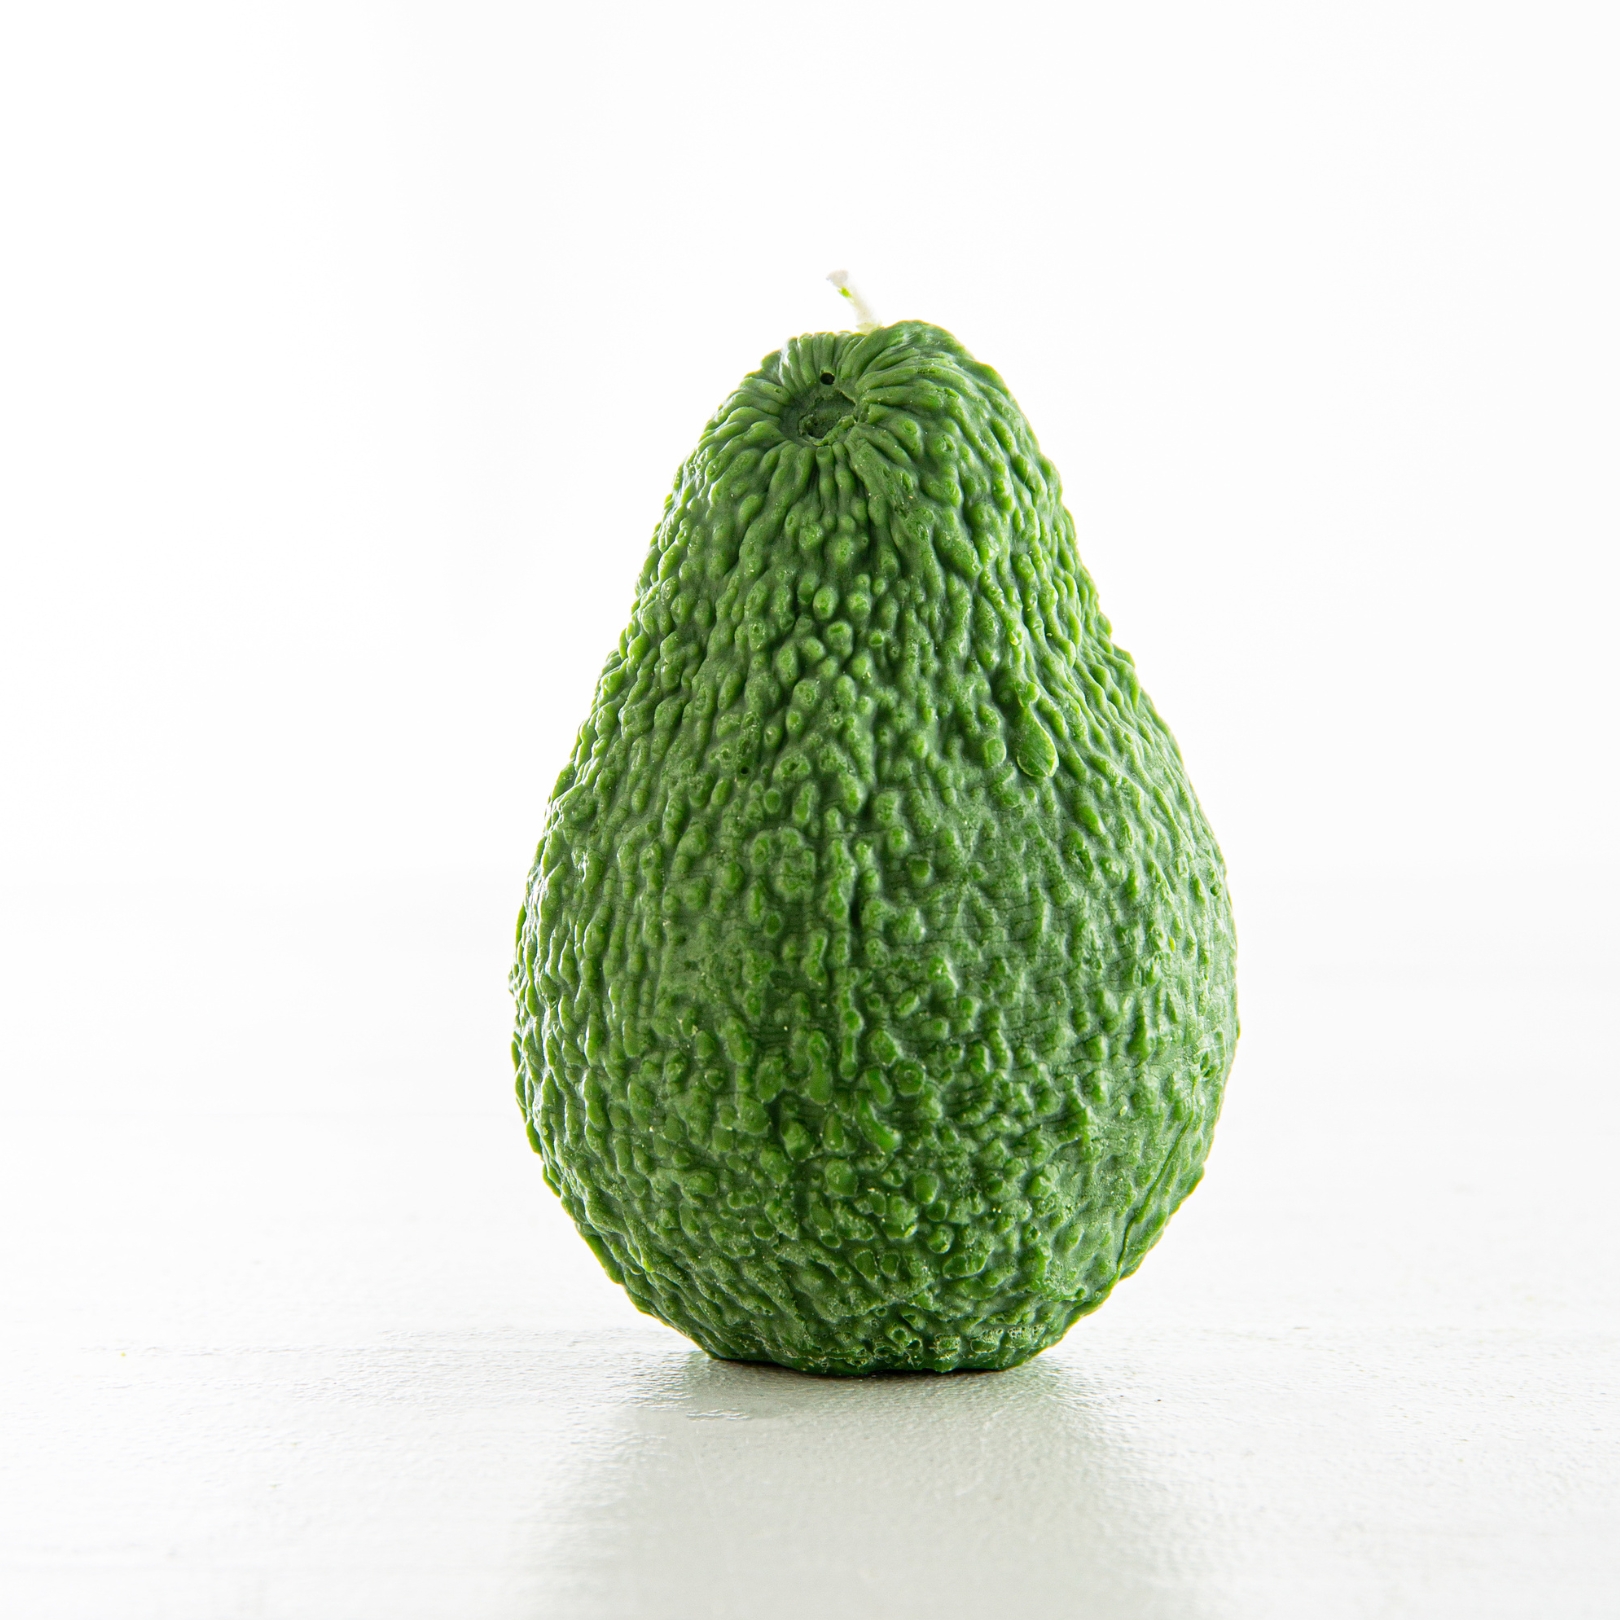 Buy The Avocado Candle Online NZ